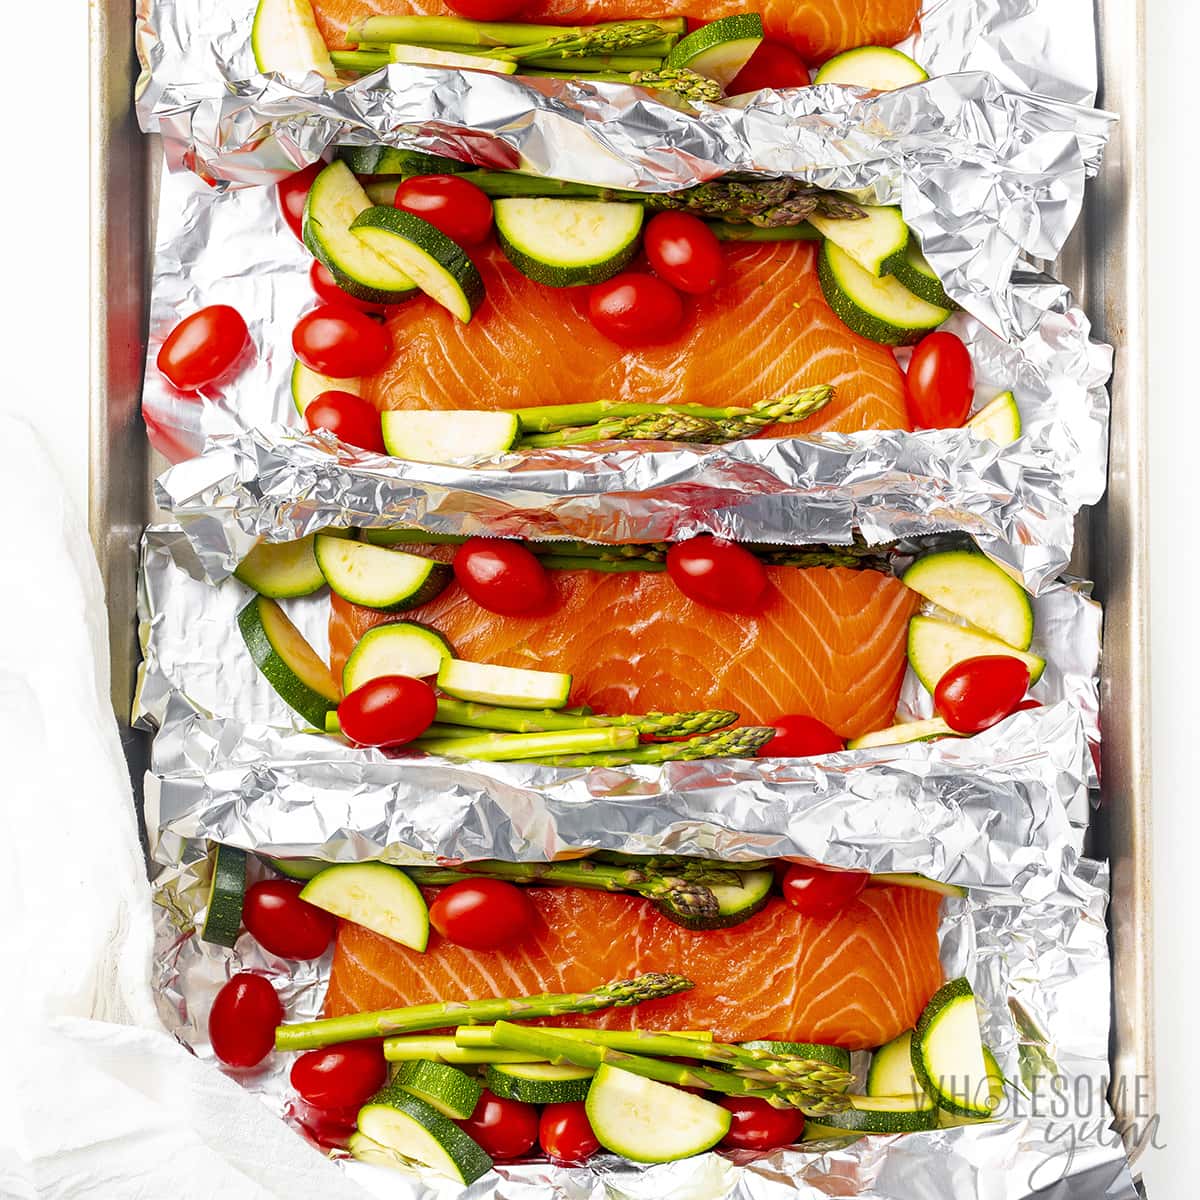 Raw salmon and veggies placed on squares of foil on a baking sheet.